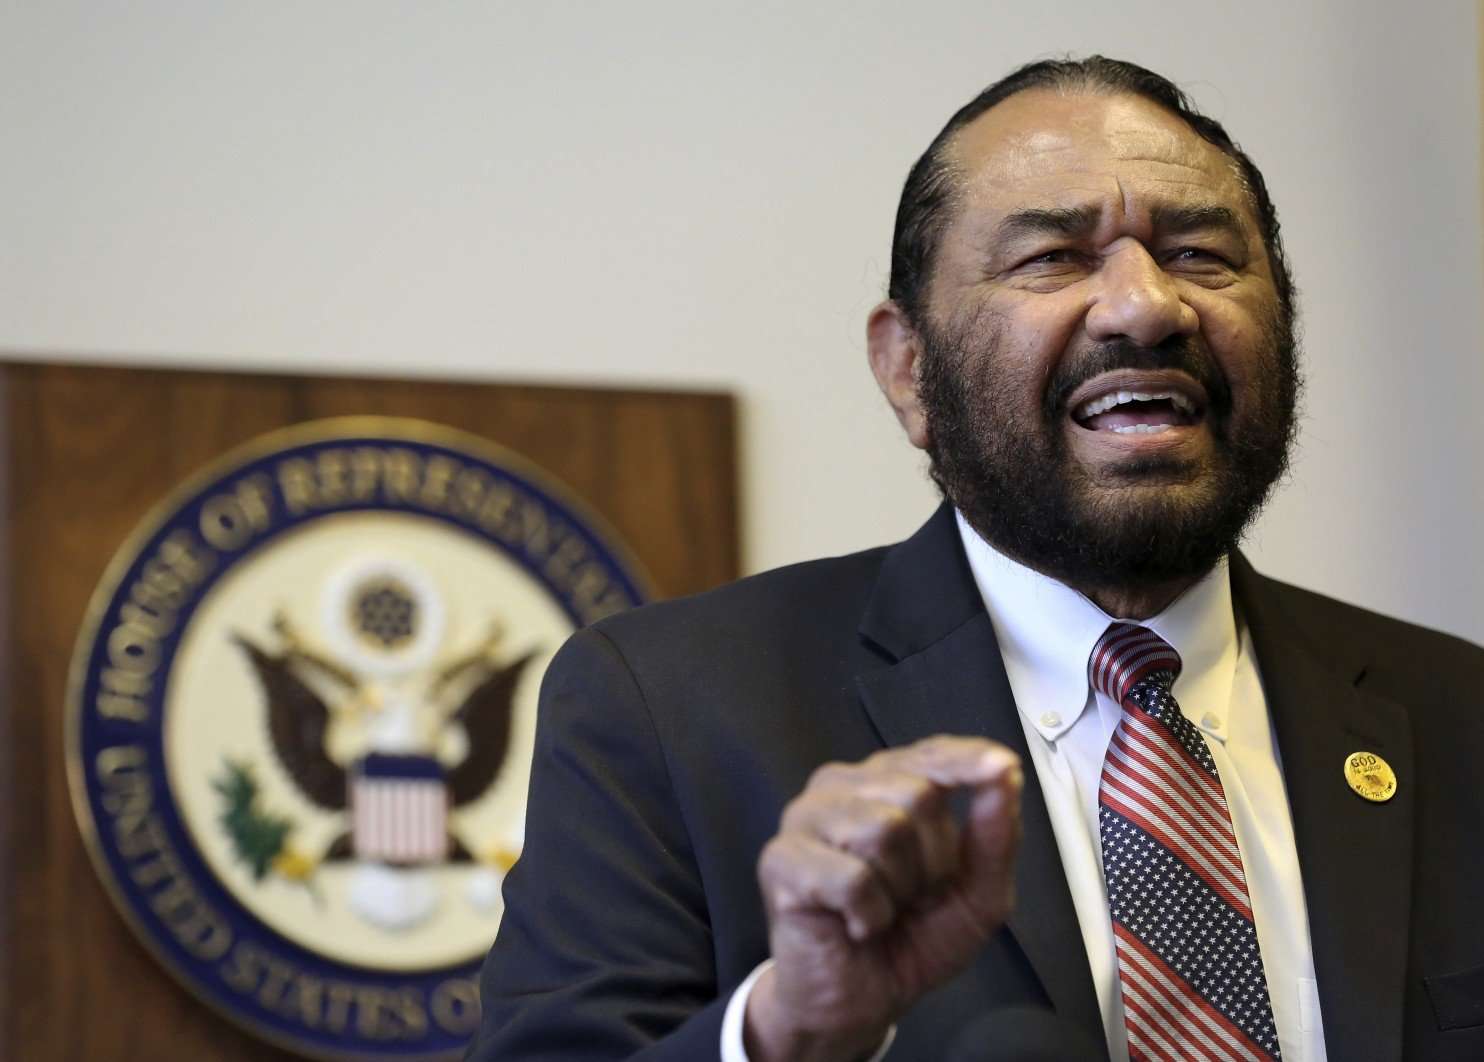 image for A black congressman called for Trump’s impeachment. Lynching threats followed, he said.